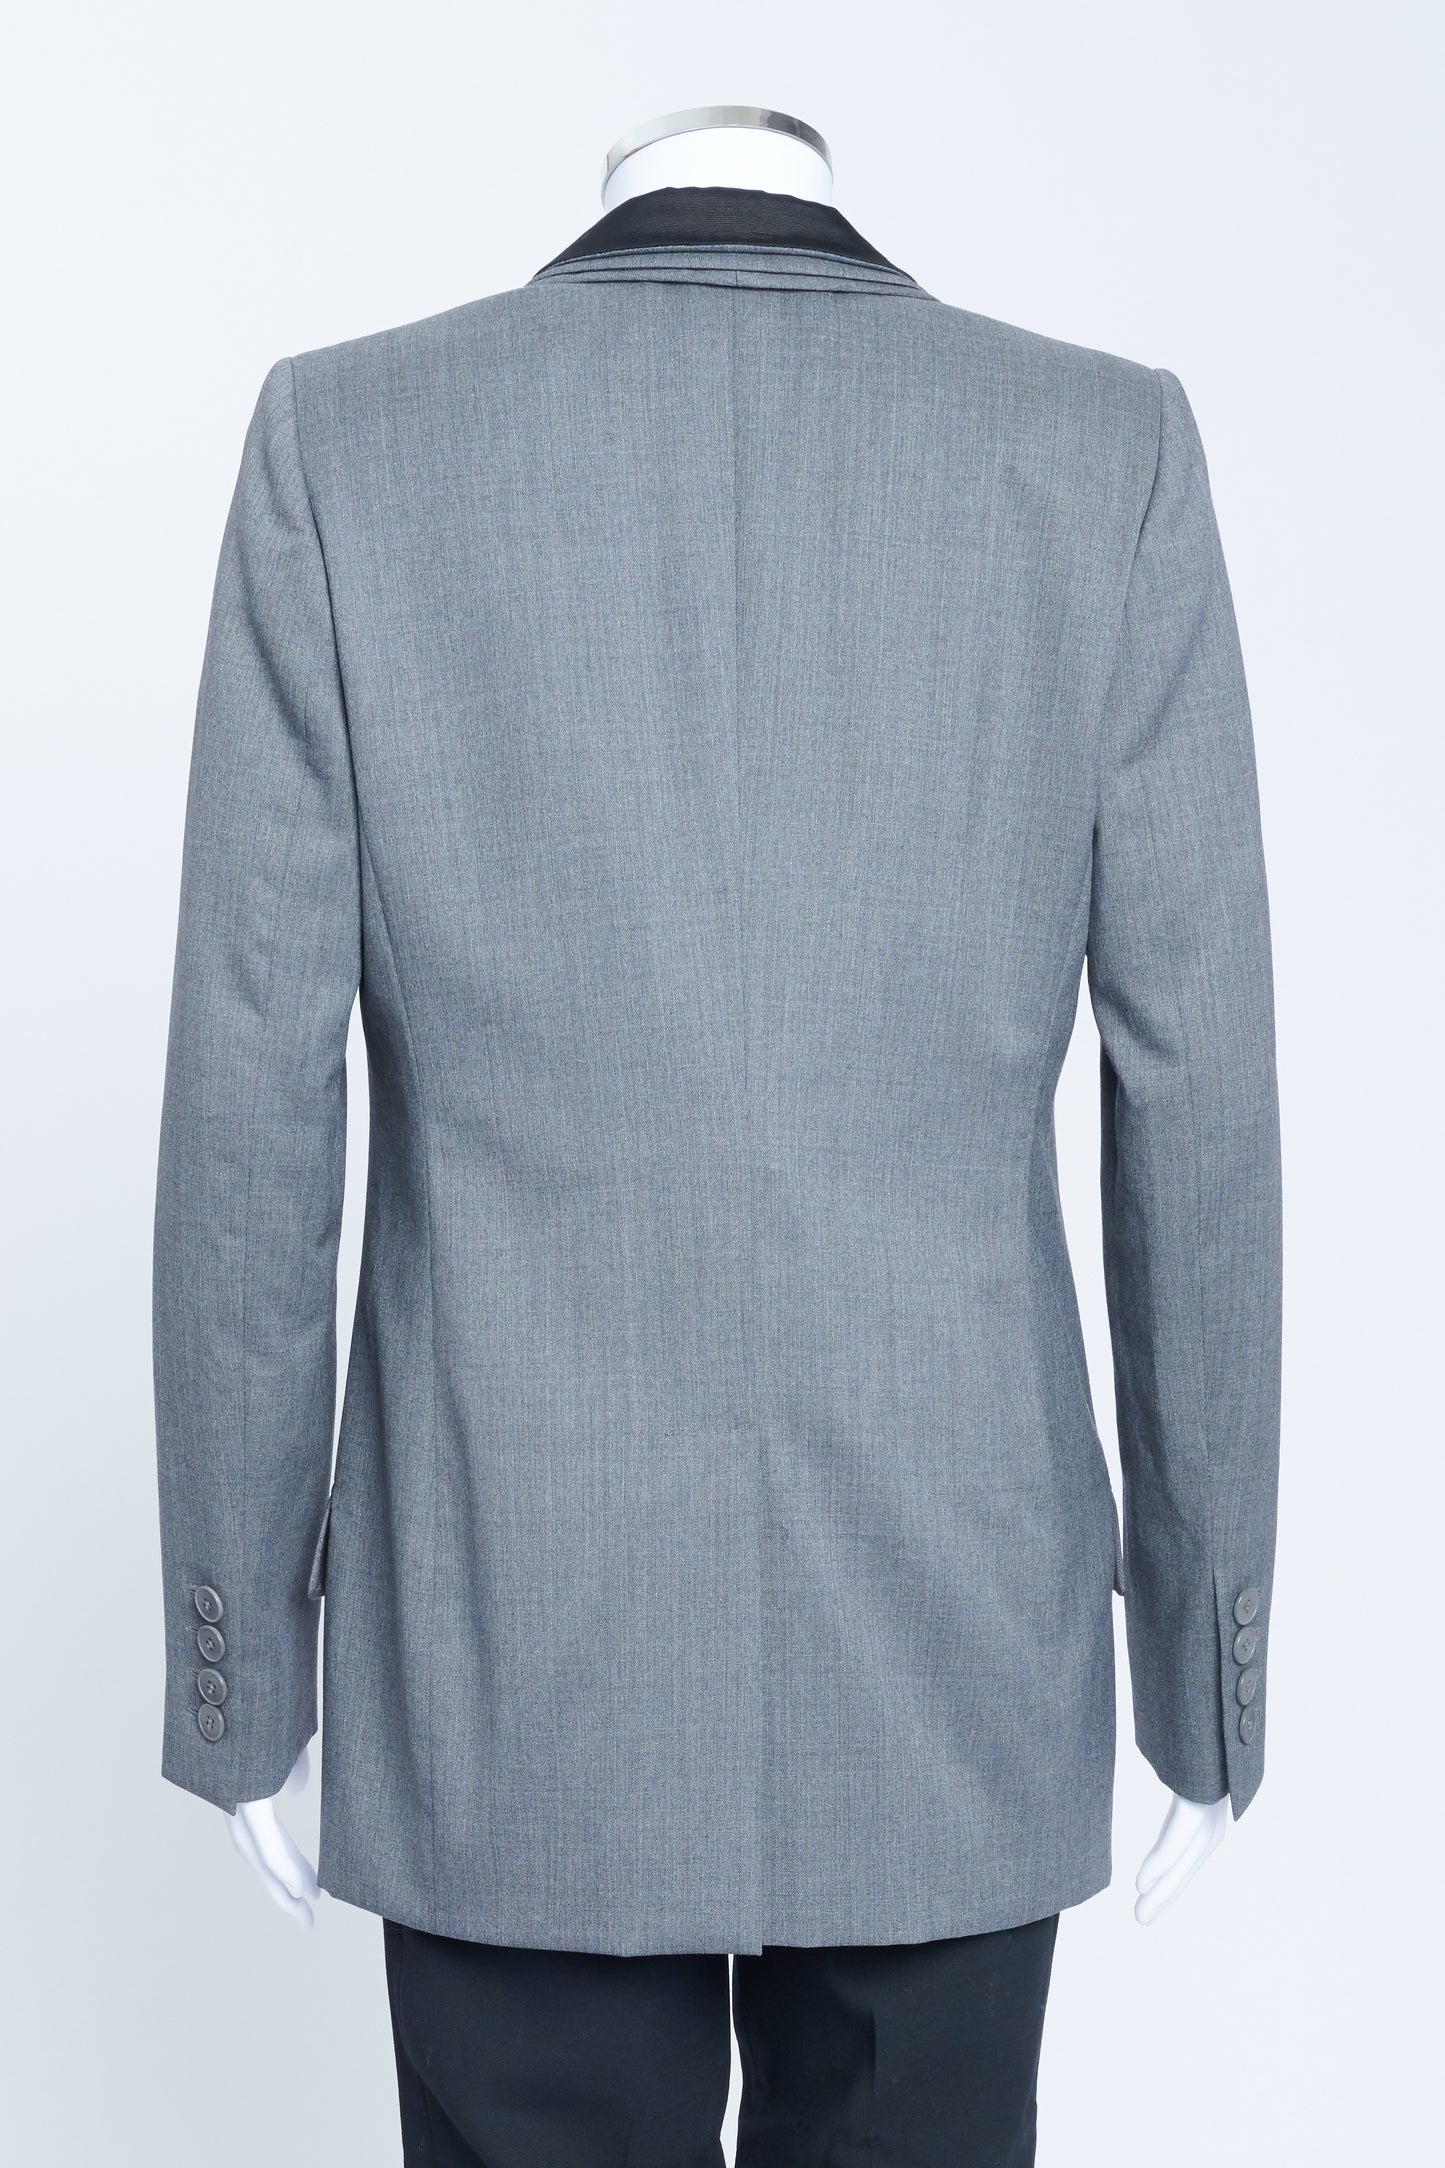 Grey wool tuxedo style jacket with triple elongated lapel, grosgrain detail and hook and eye fastening.